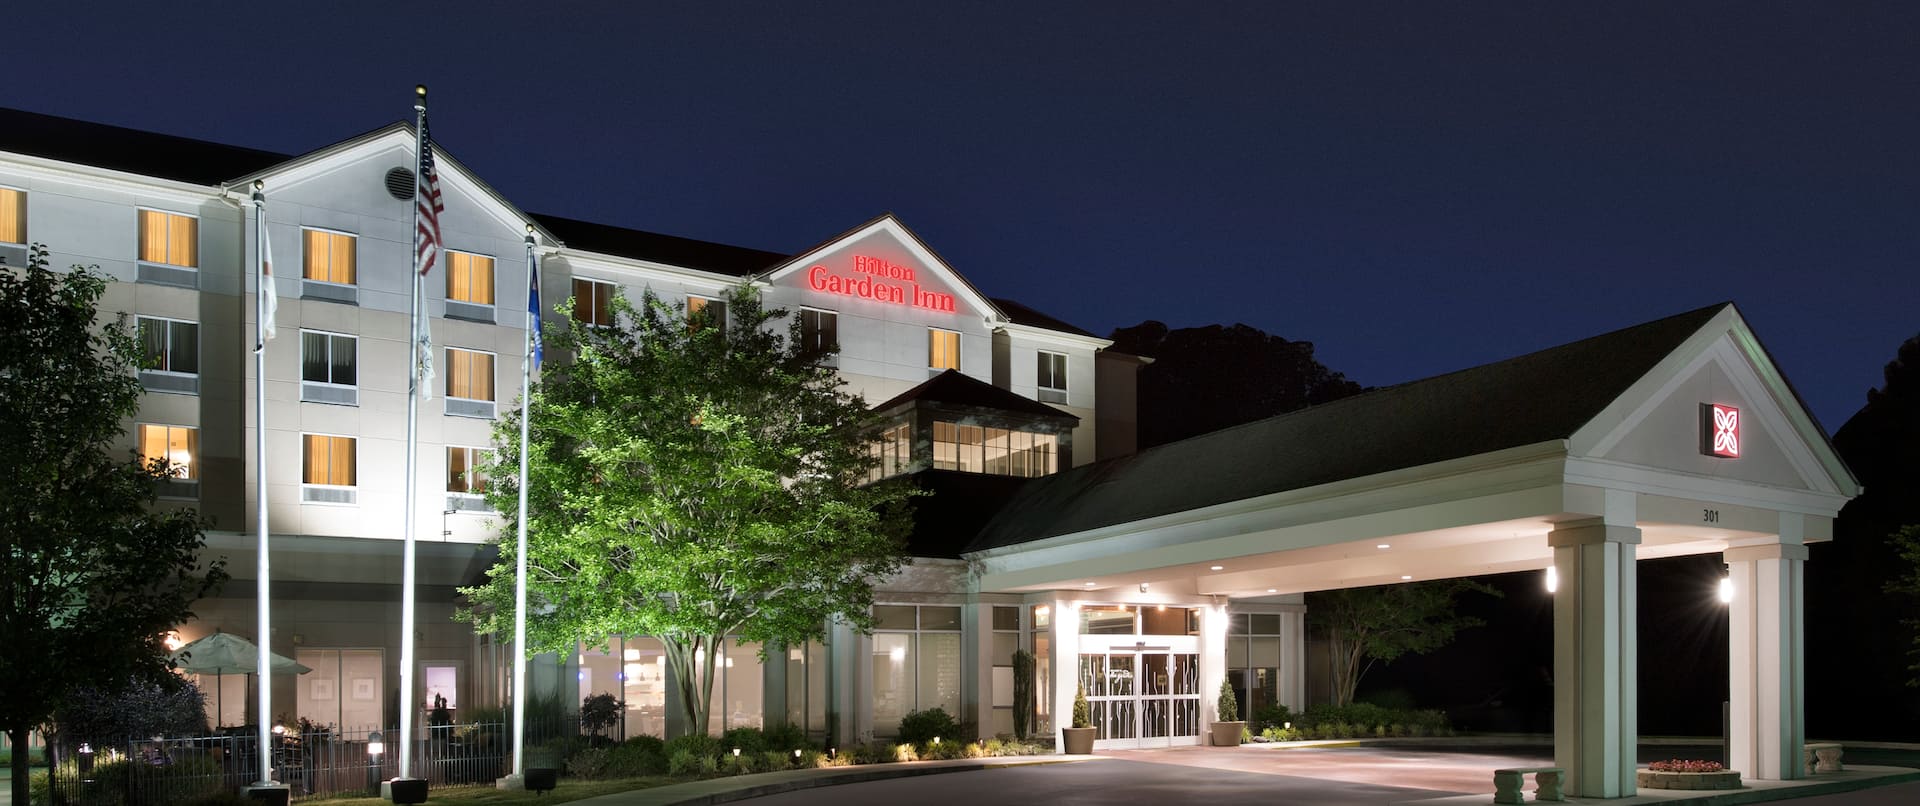  Angled View of Hotel Exterior, Signage, Flagpoles, Landscaping, and Circle Driveway Illuminated at Night